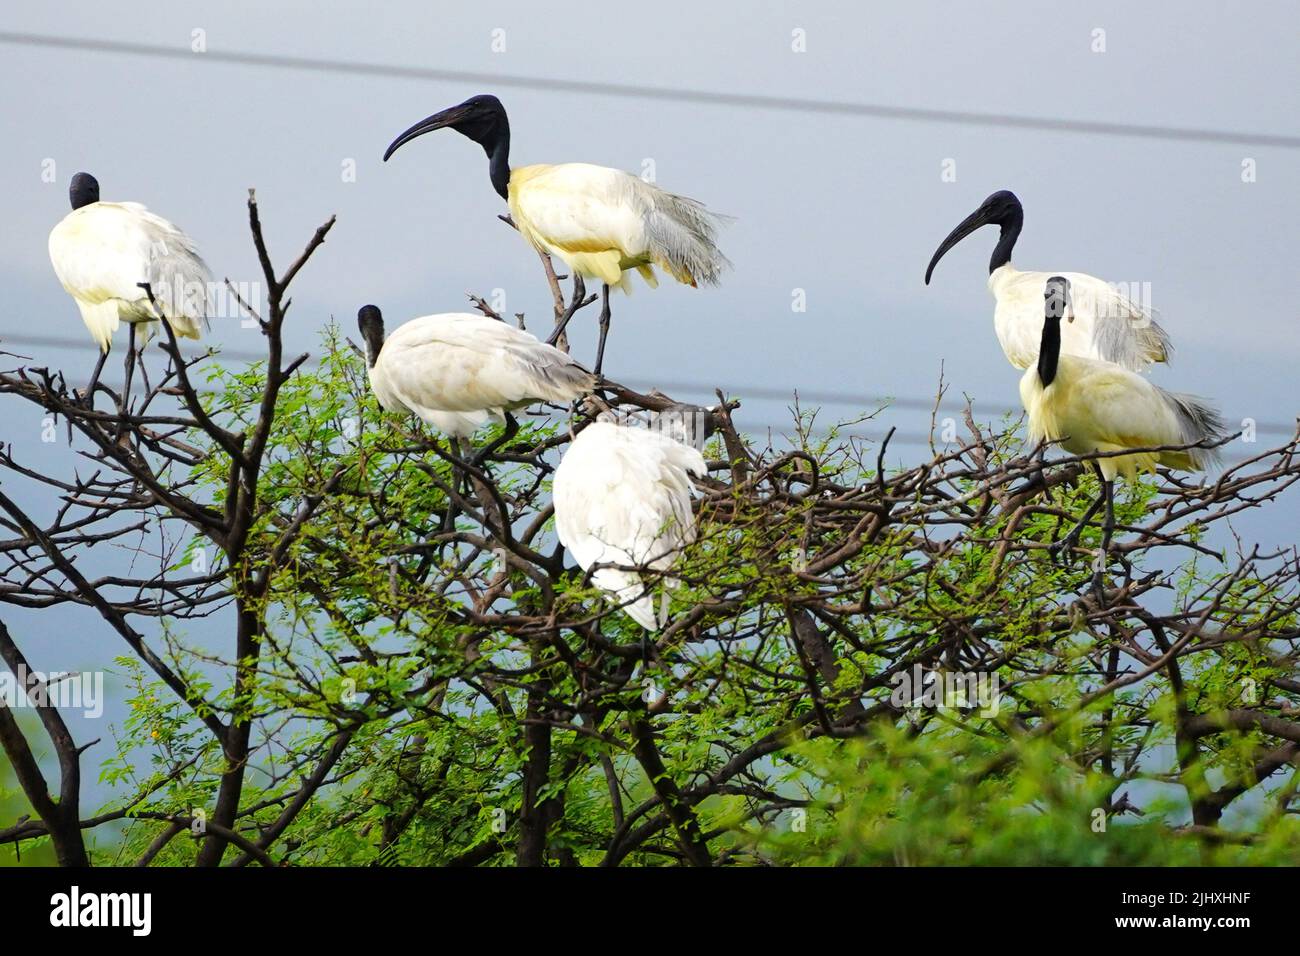 Black-Headed Ibis during monsoon session on the outskirts of Ajmer, Rajasthan, India on July 16, 2022. Photo by ABACAPRESS.COM Stock Photo